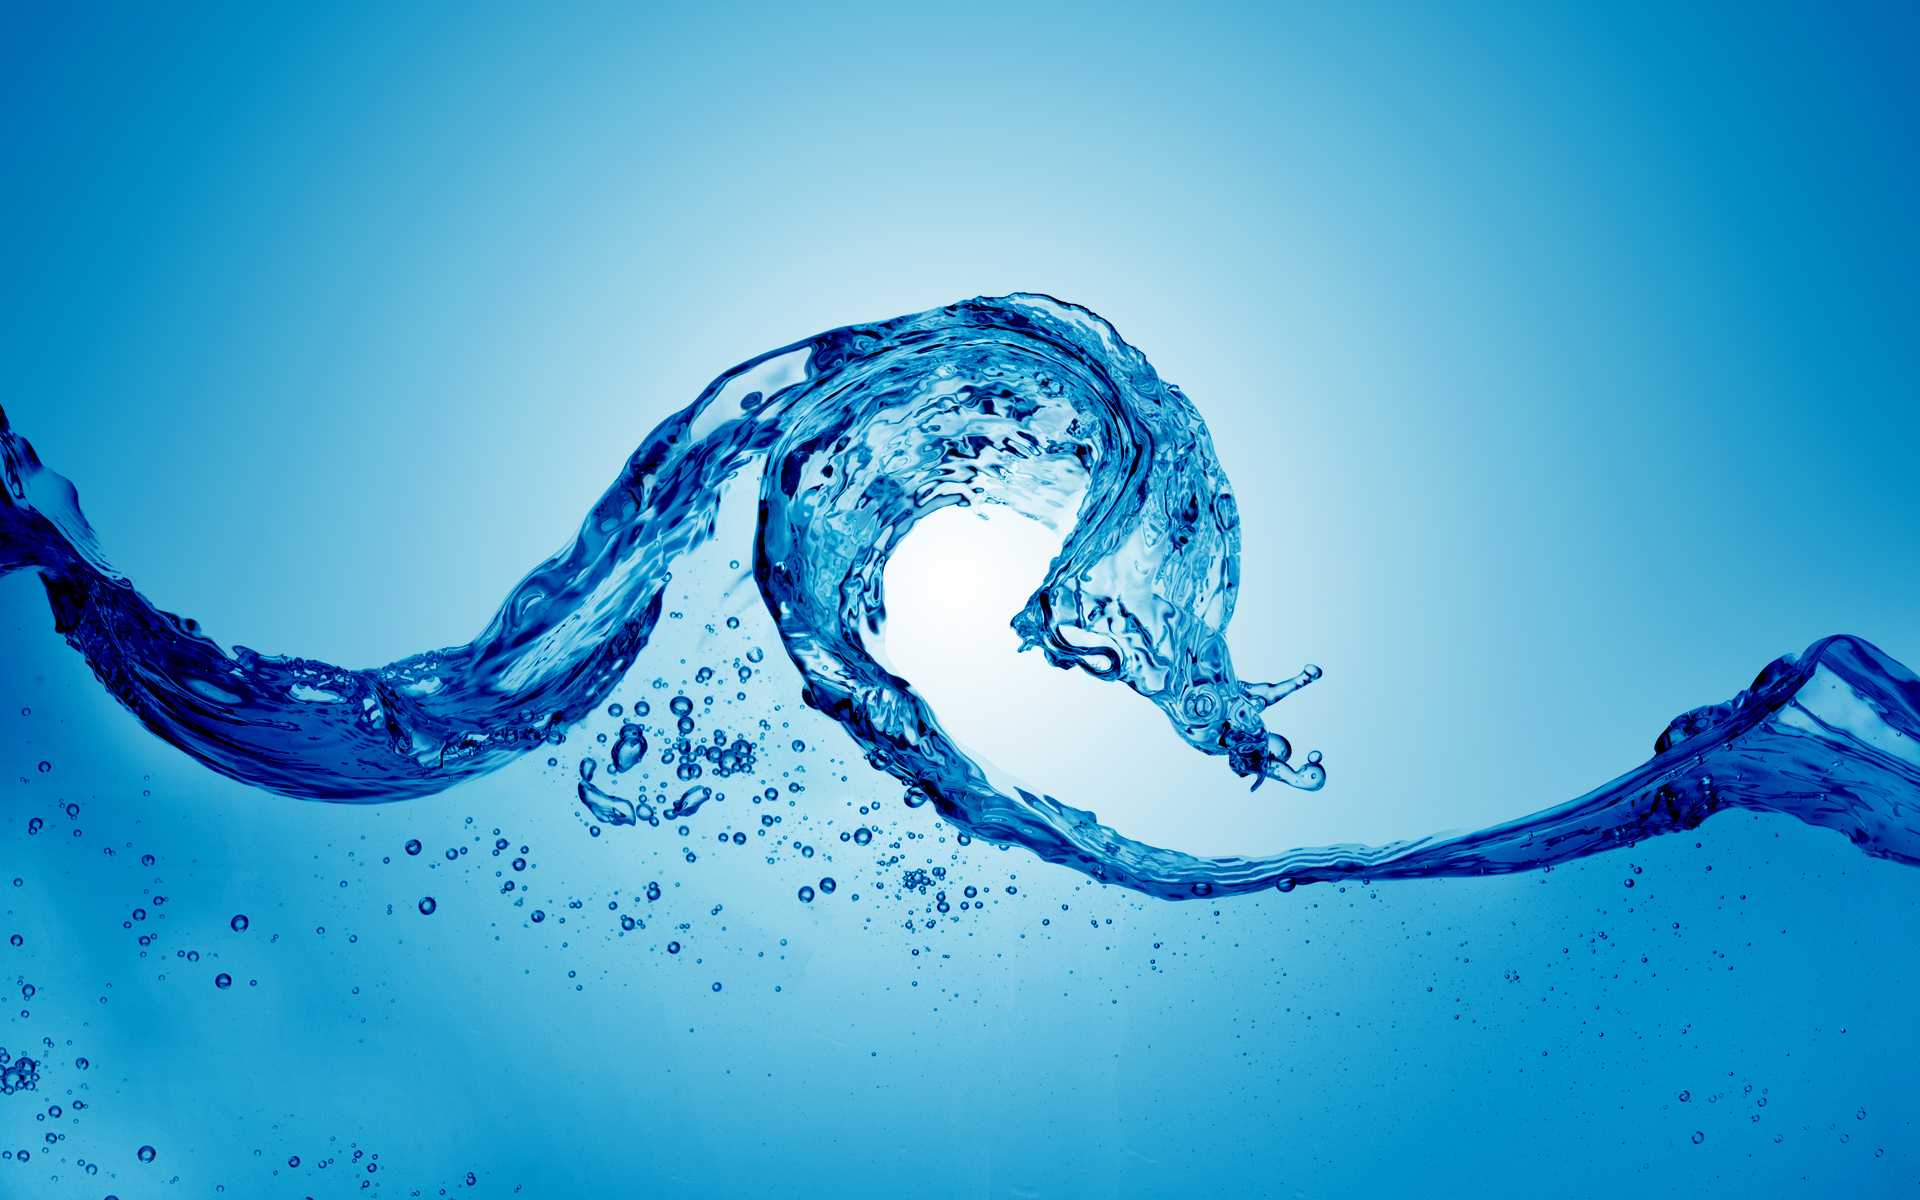 best water wallpaper Collection